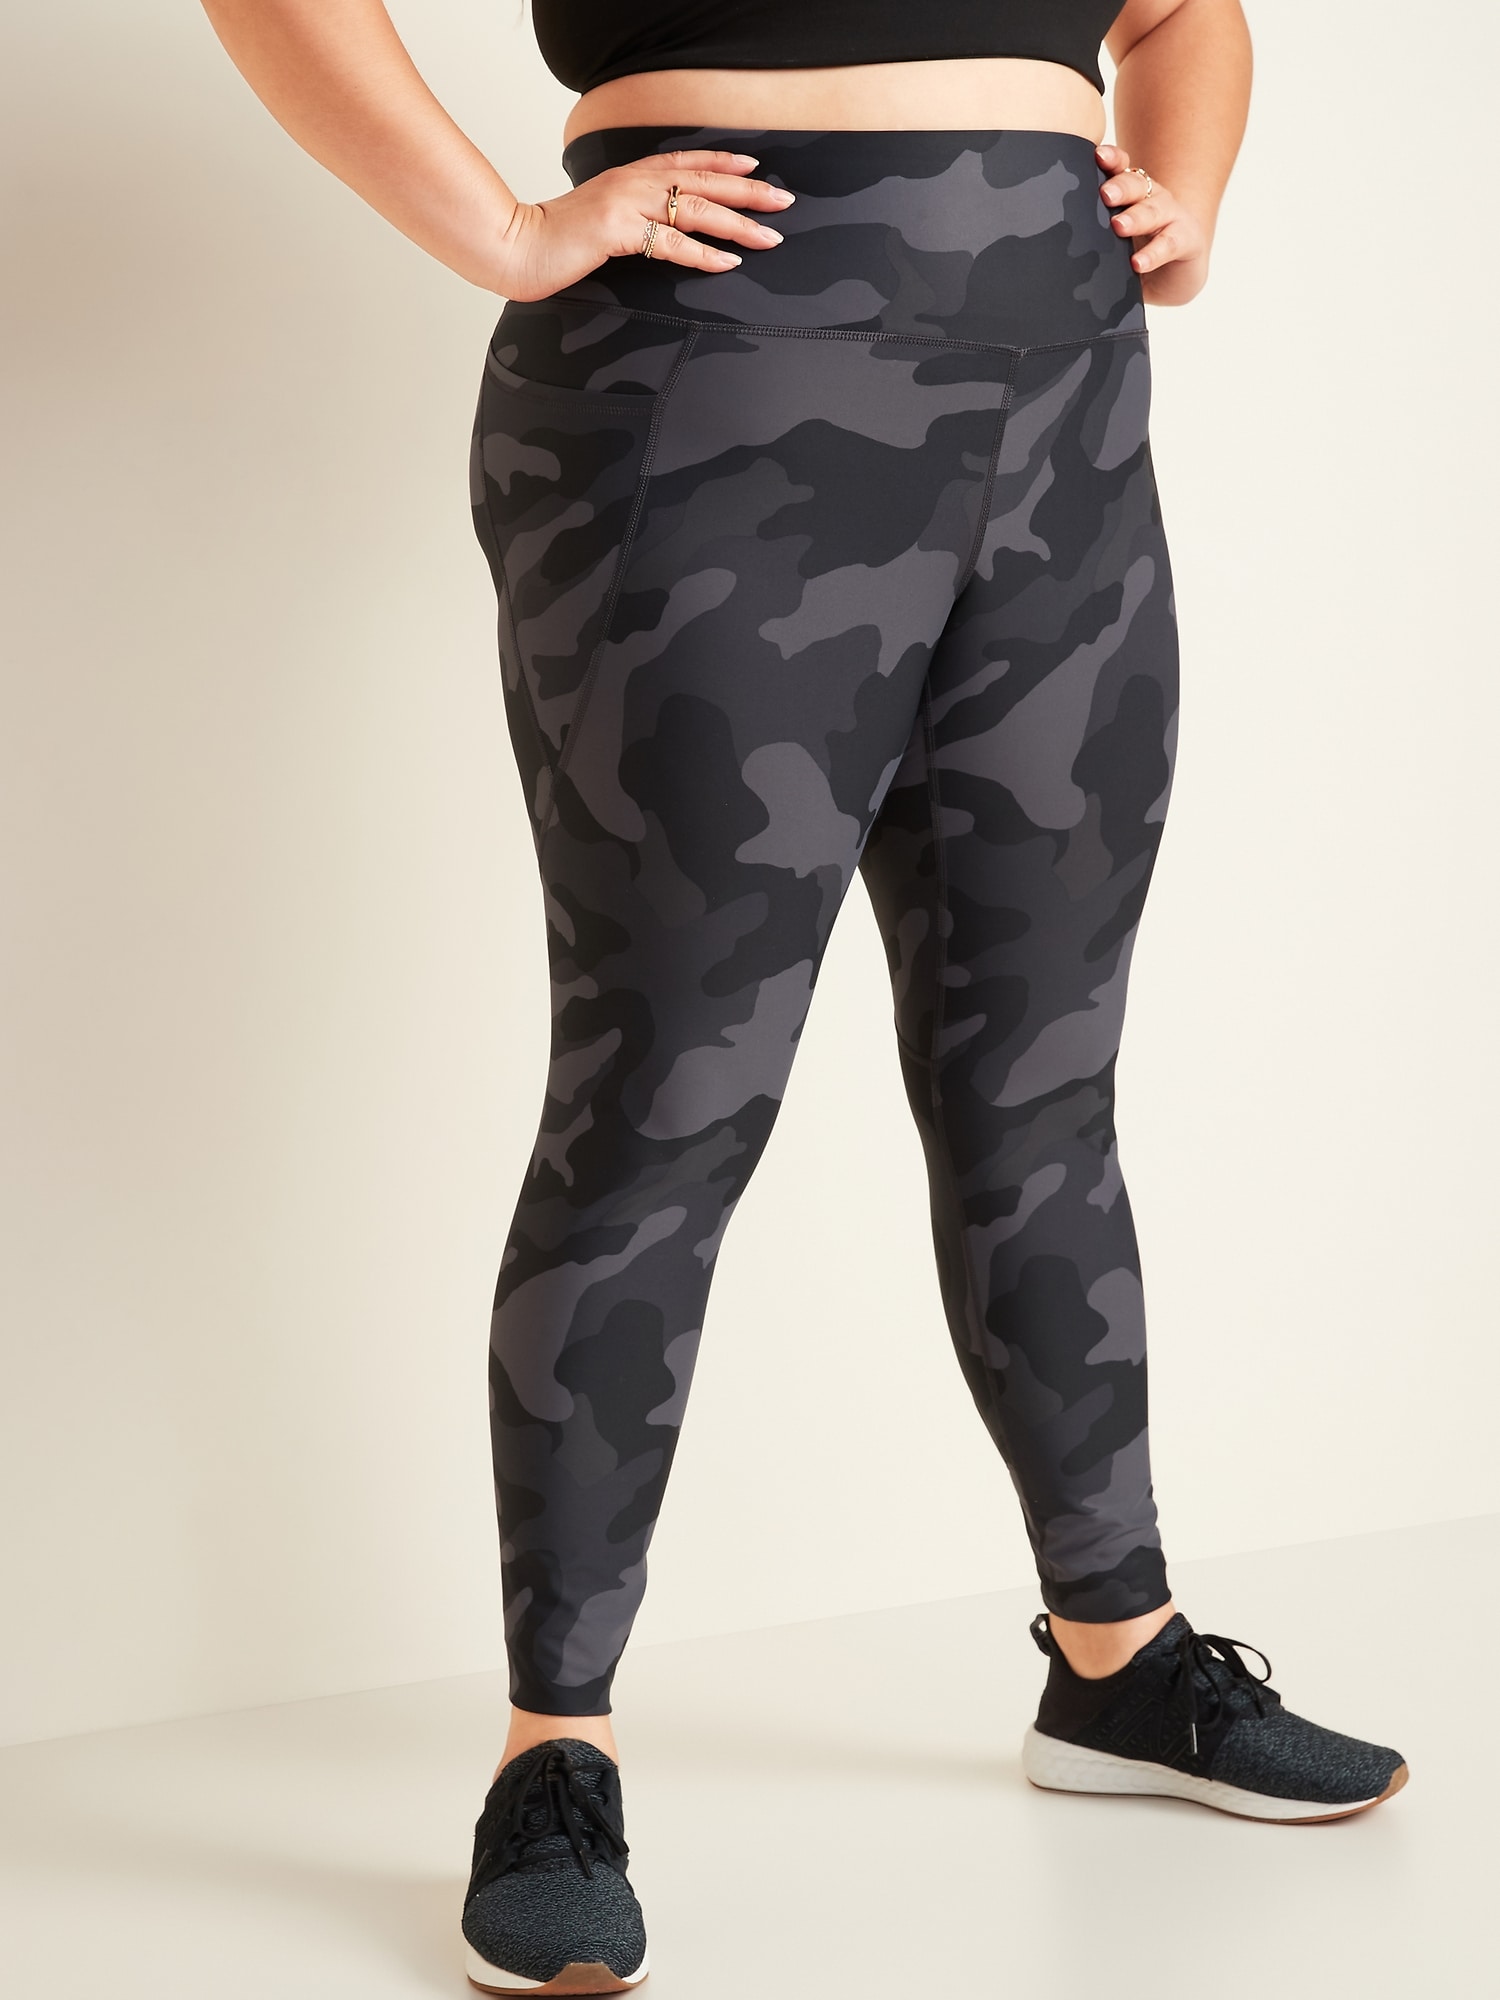 Did Old Navy Weave Its Activewear With Magic? Because These Leggings Are  Quality